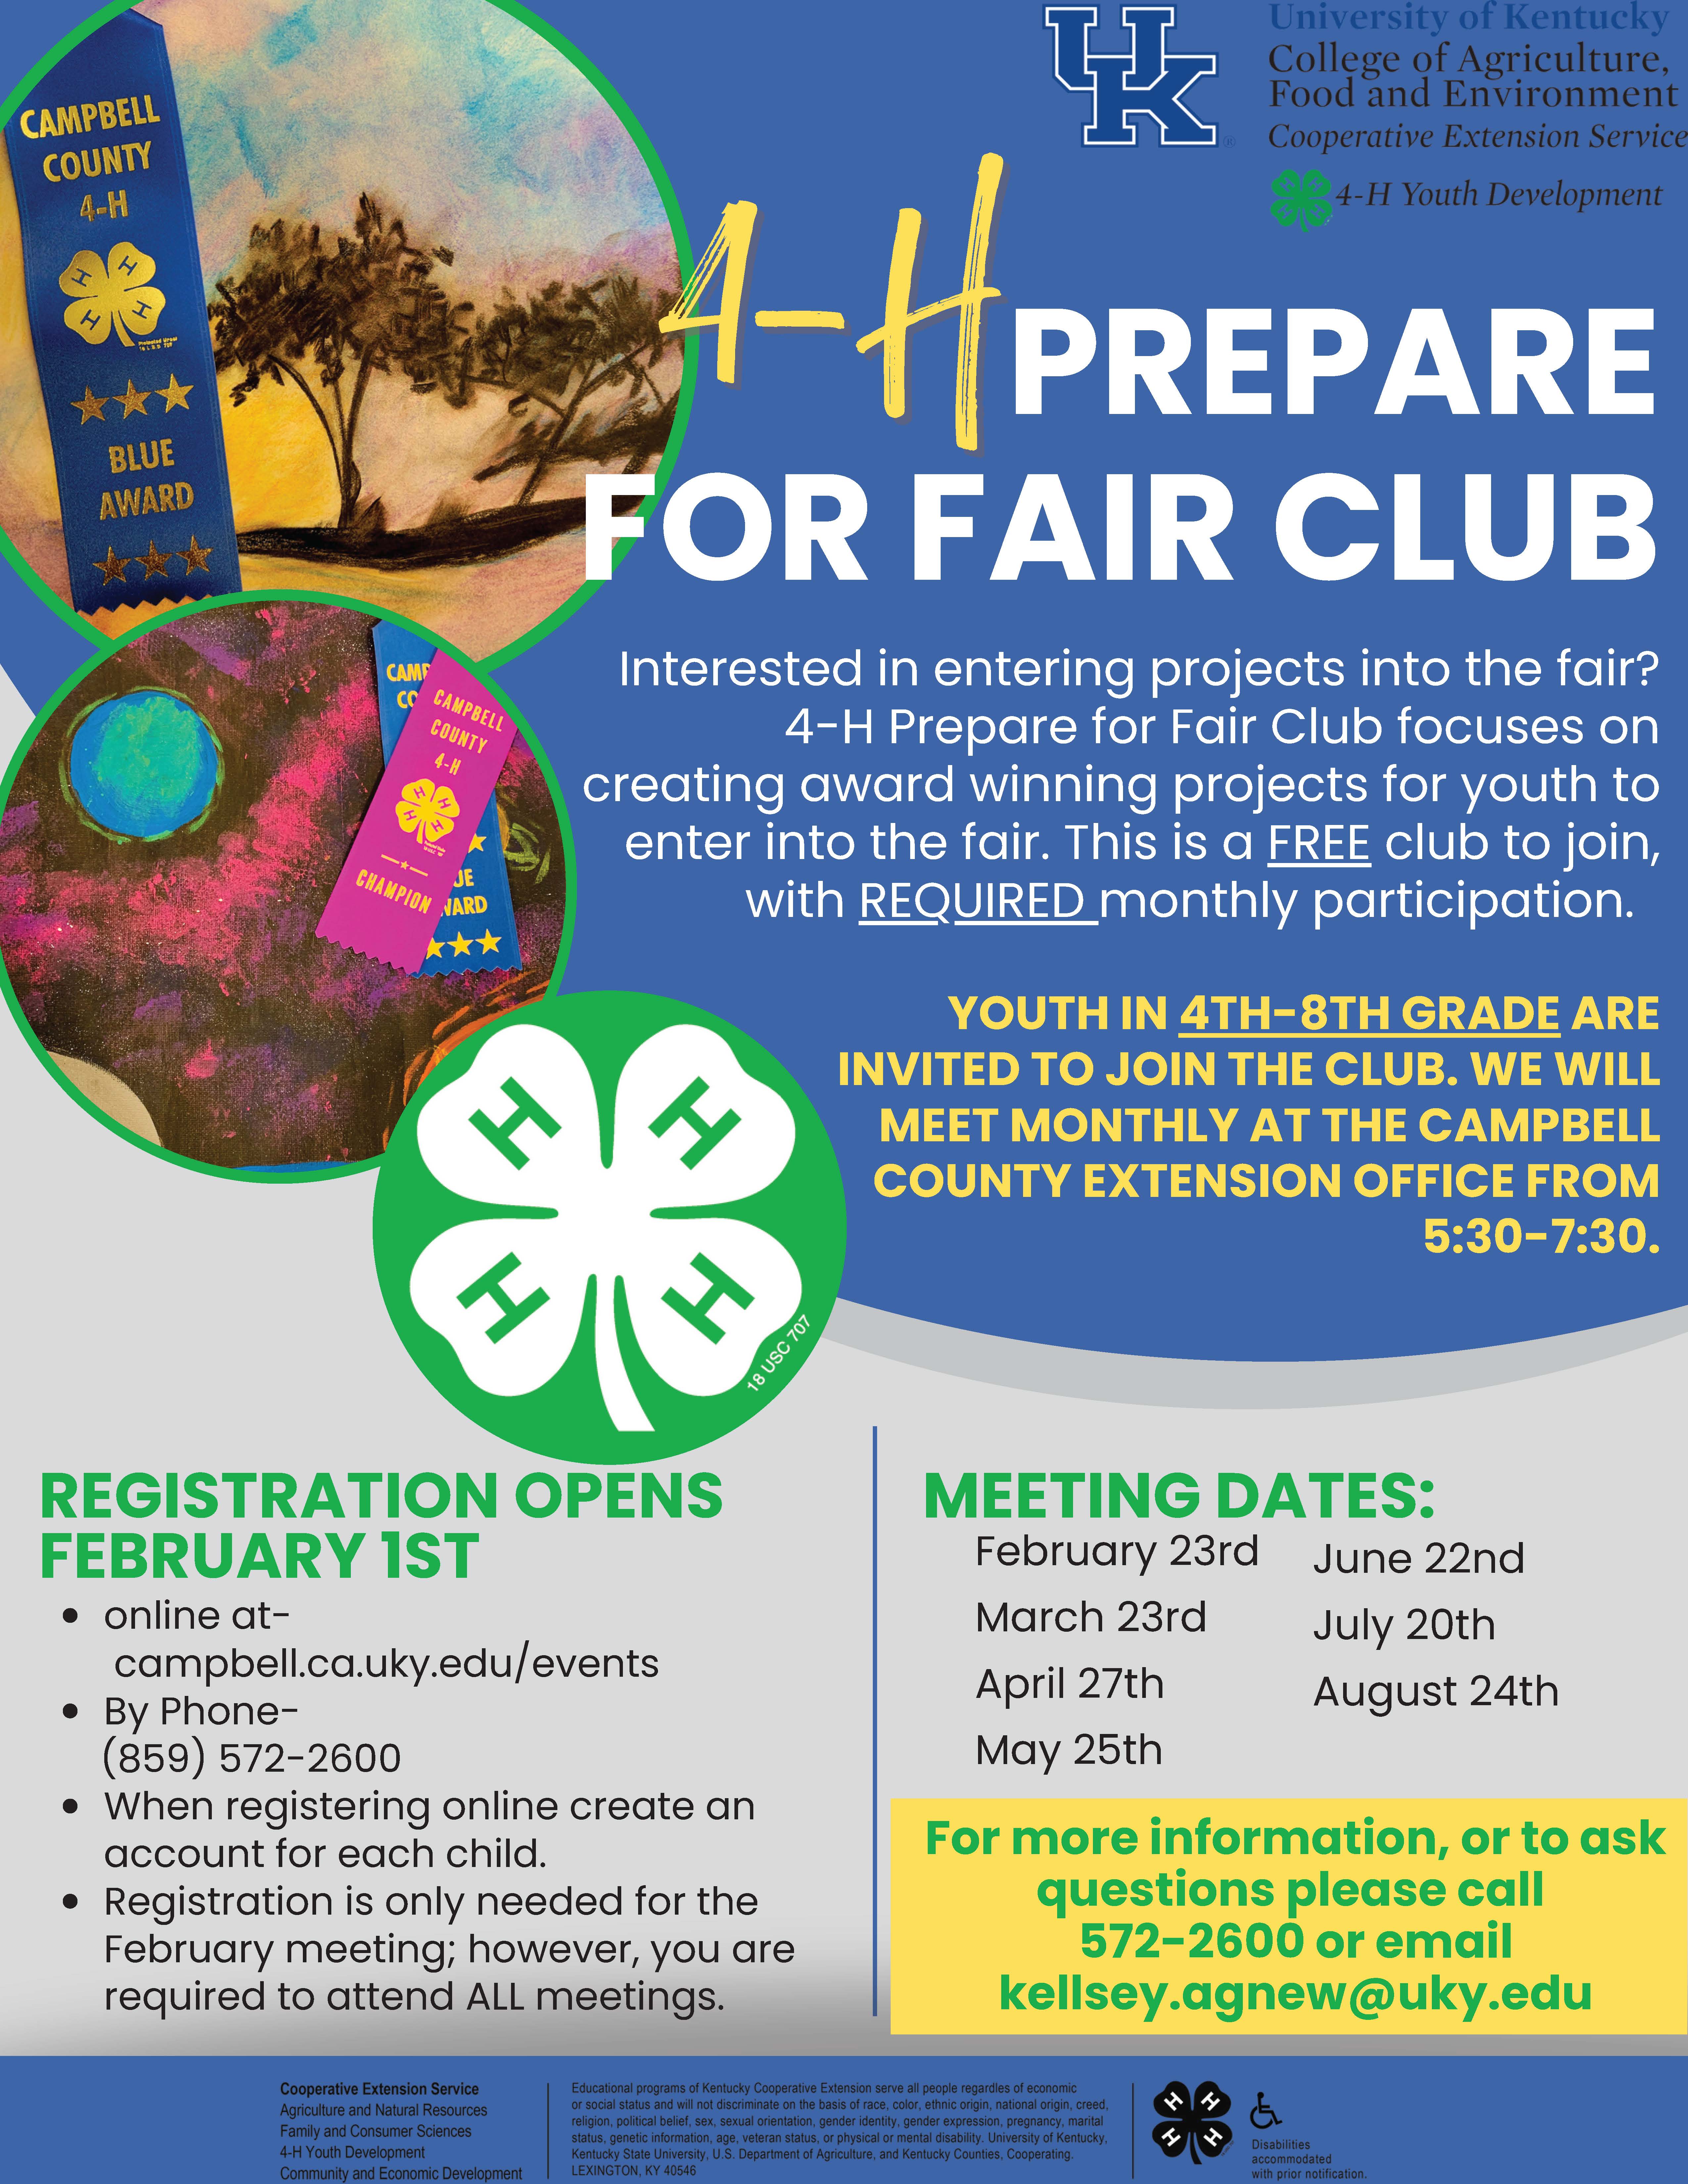 4-H Prepare for Fair Club: for youth in grades 4-8. They will meet on February 23, March 23, April 27, May 25, June 22, July 20, and August 24 to work on projects for the fair. Call 859-572-2600 to register!